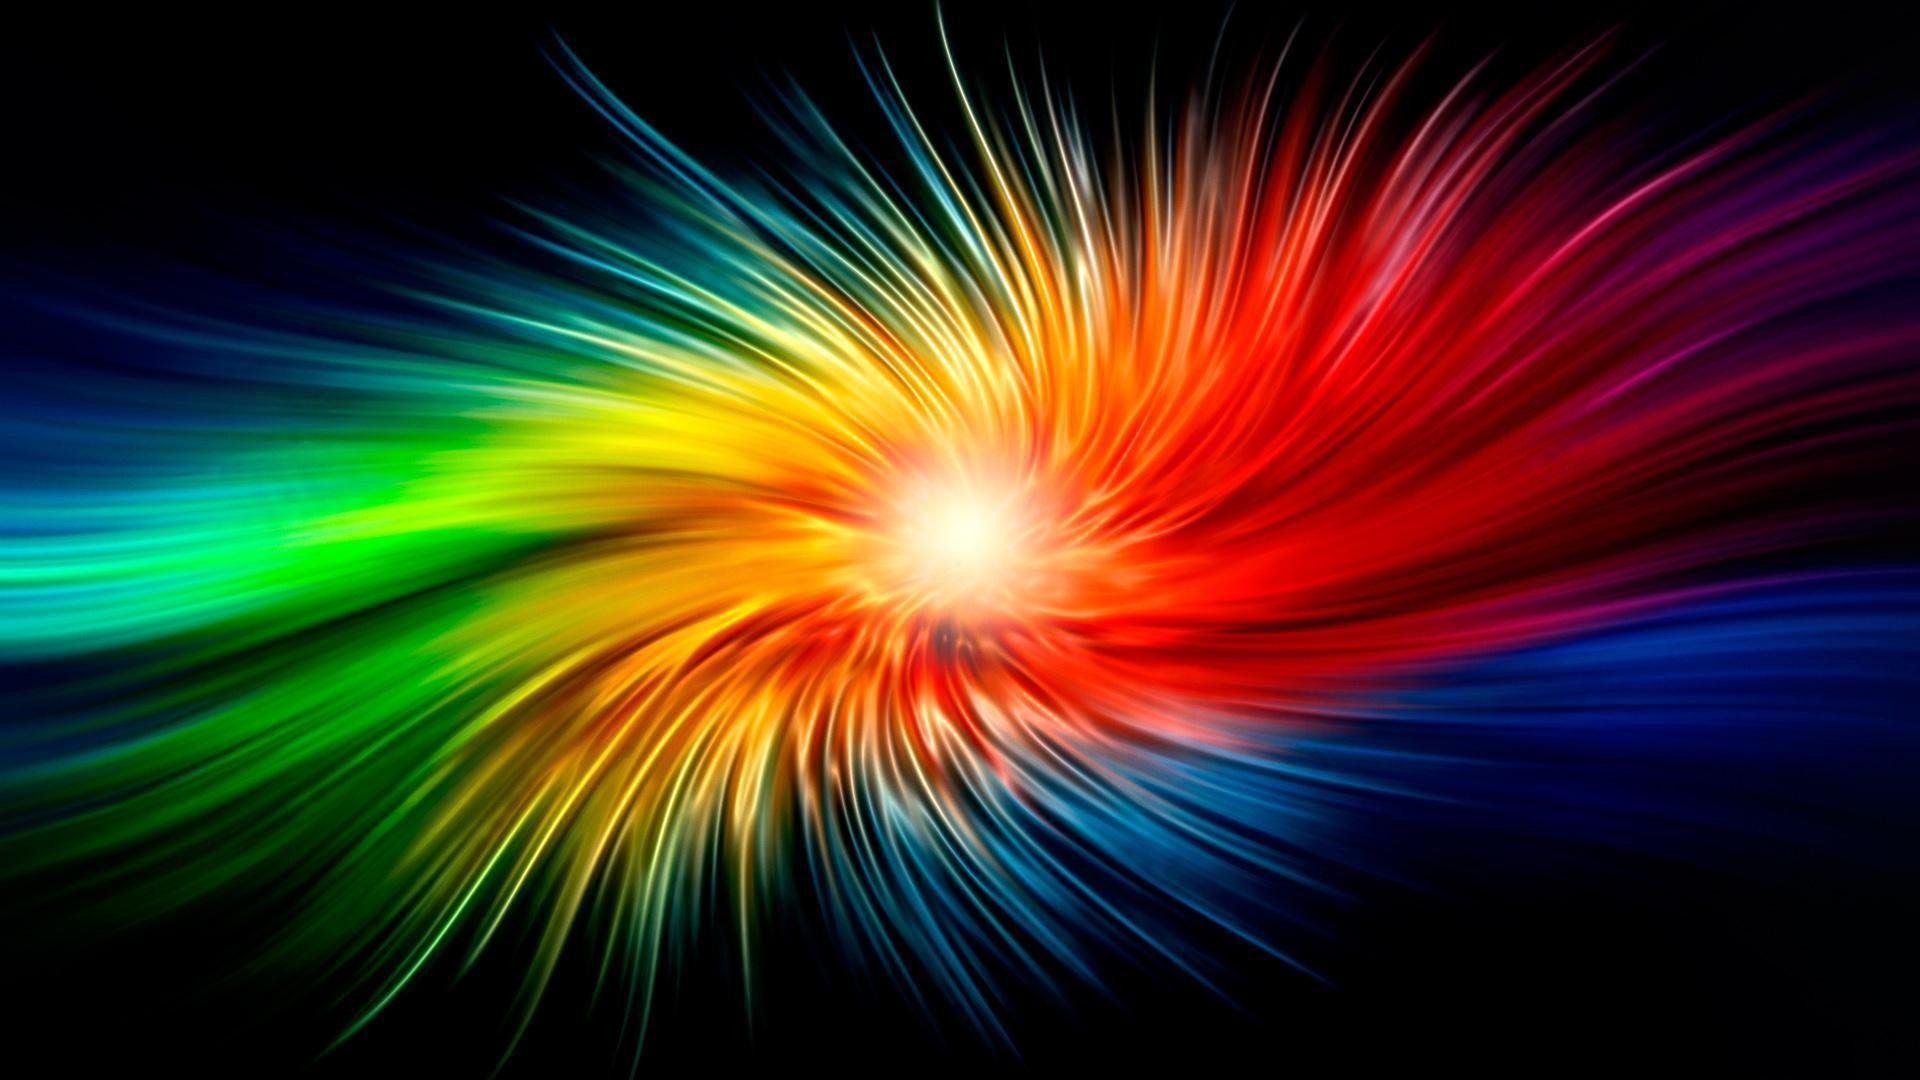 59 Color Explosion Wallpapers On Wallpaperplay Datasrc  Colorful Wallpaper  Iphone  1080x1920 Wallpaper  teahubio